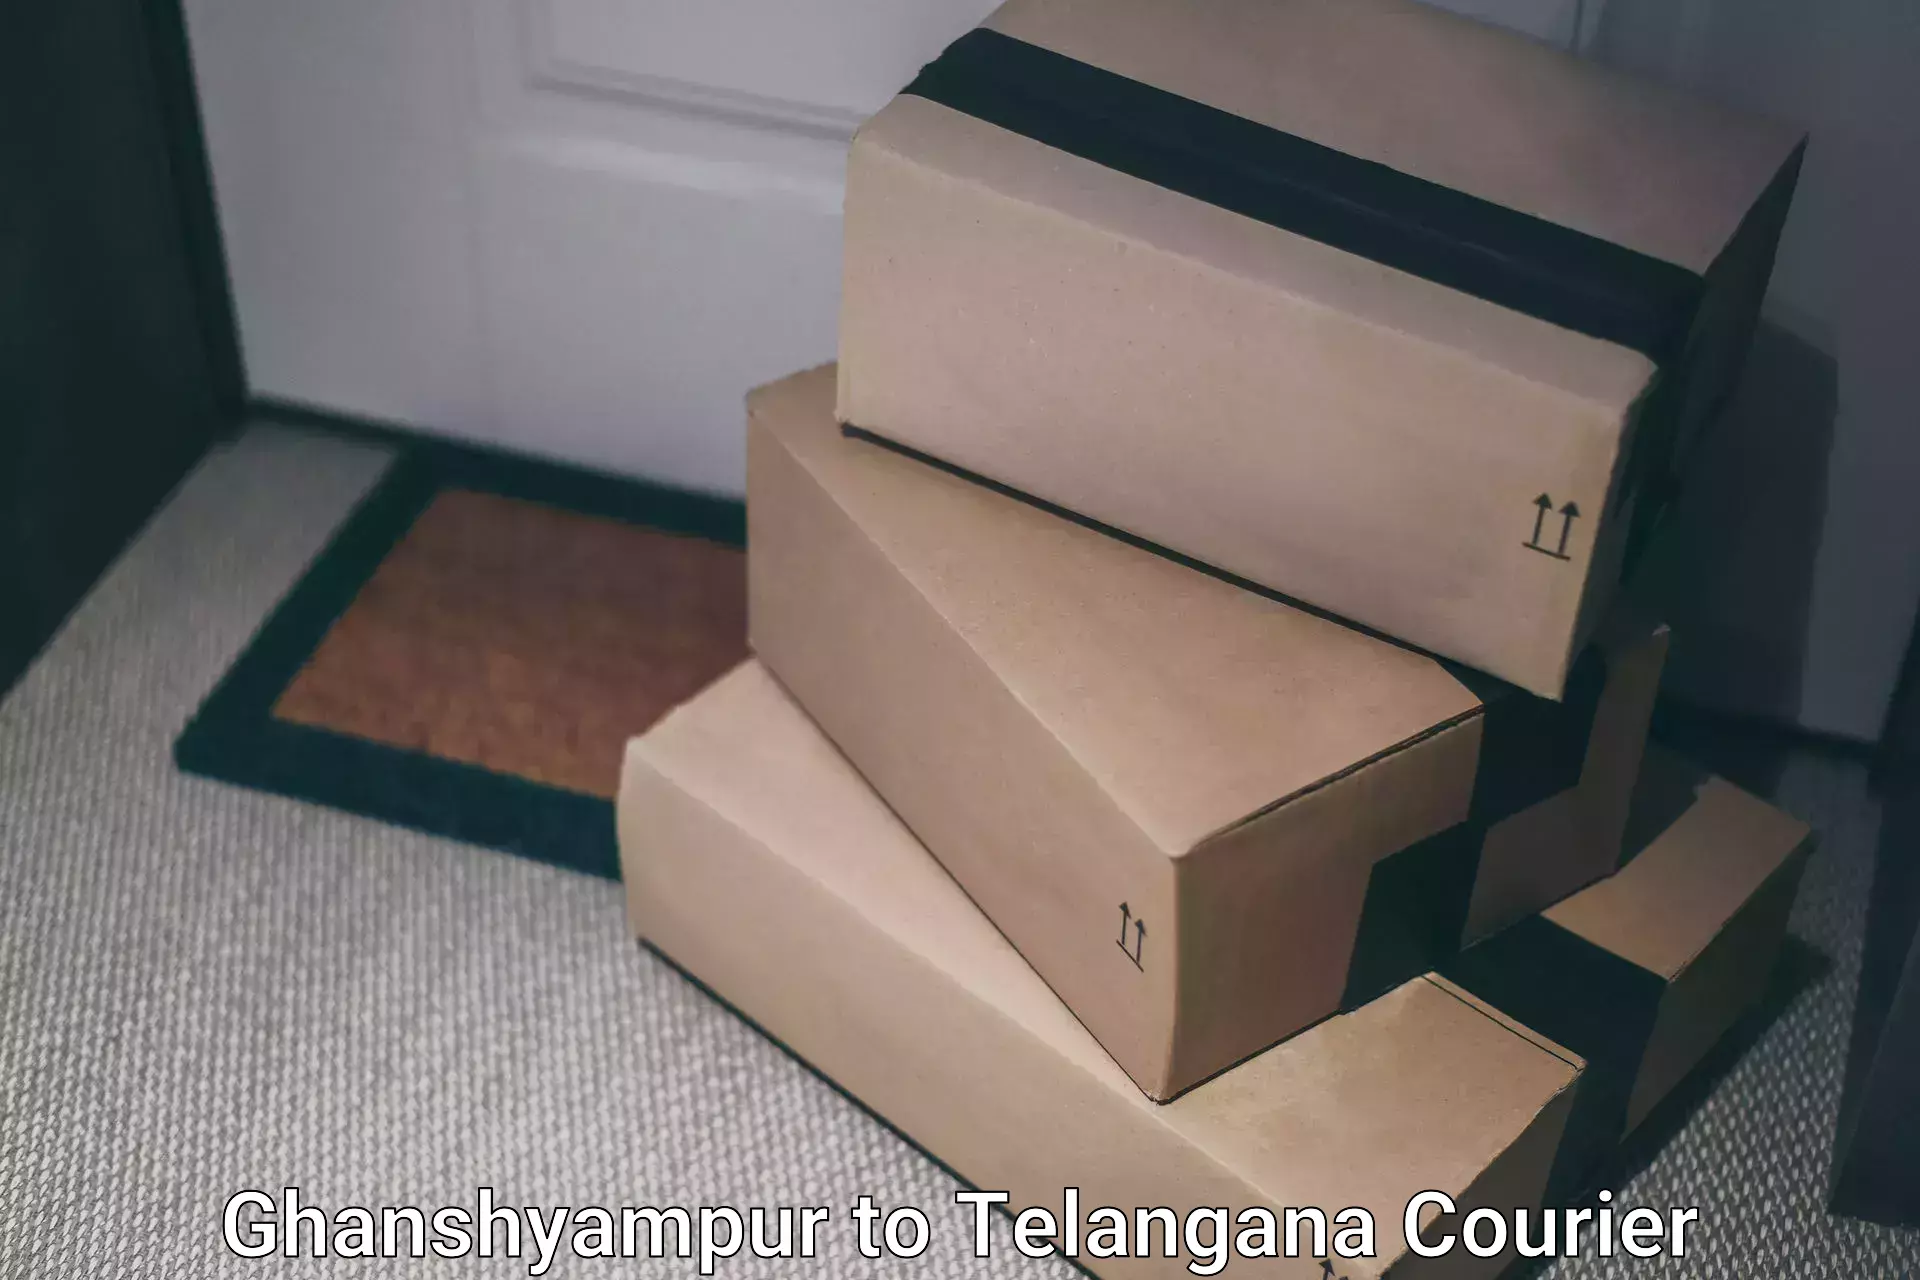 Full-service courier options in Ghanshyampur to Telangana